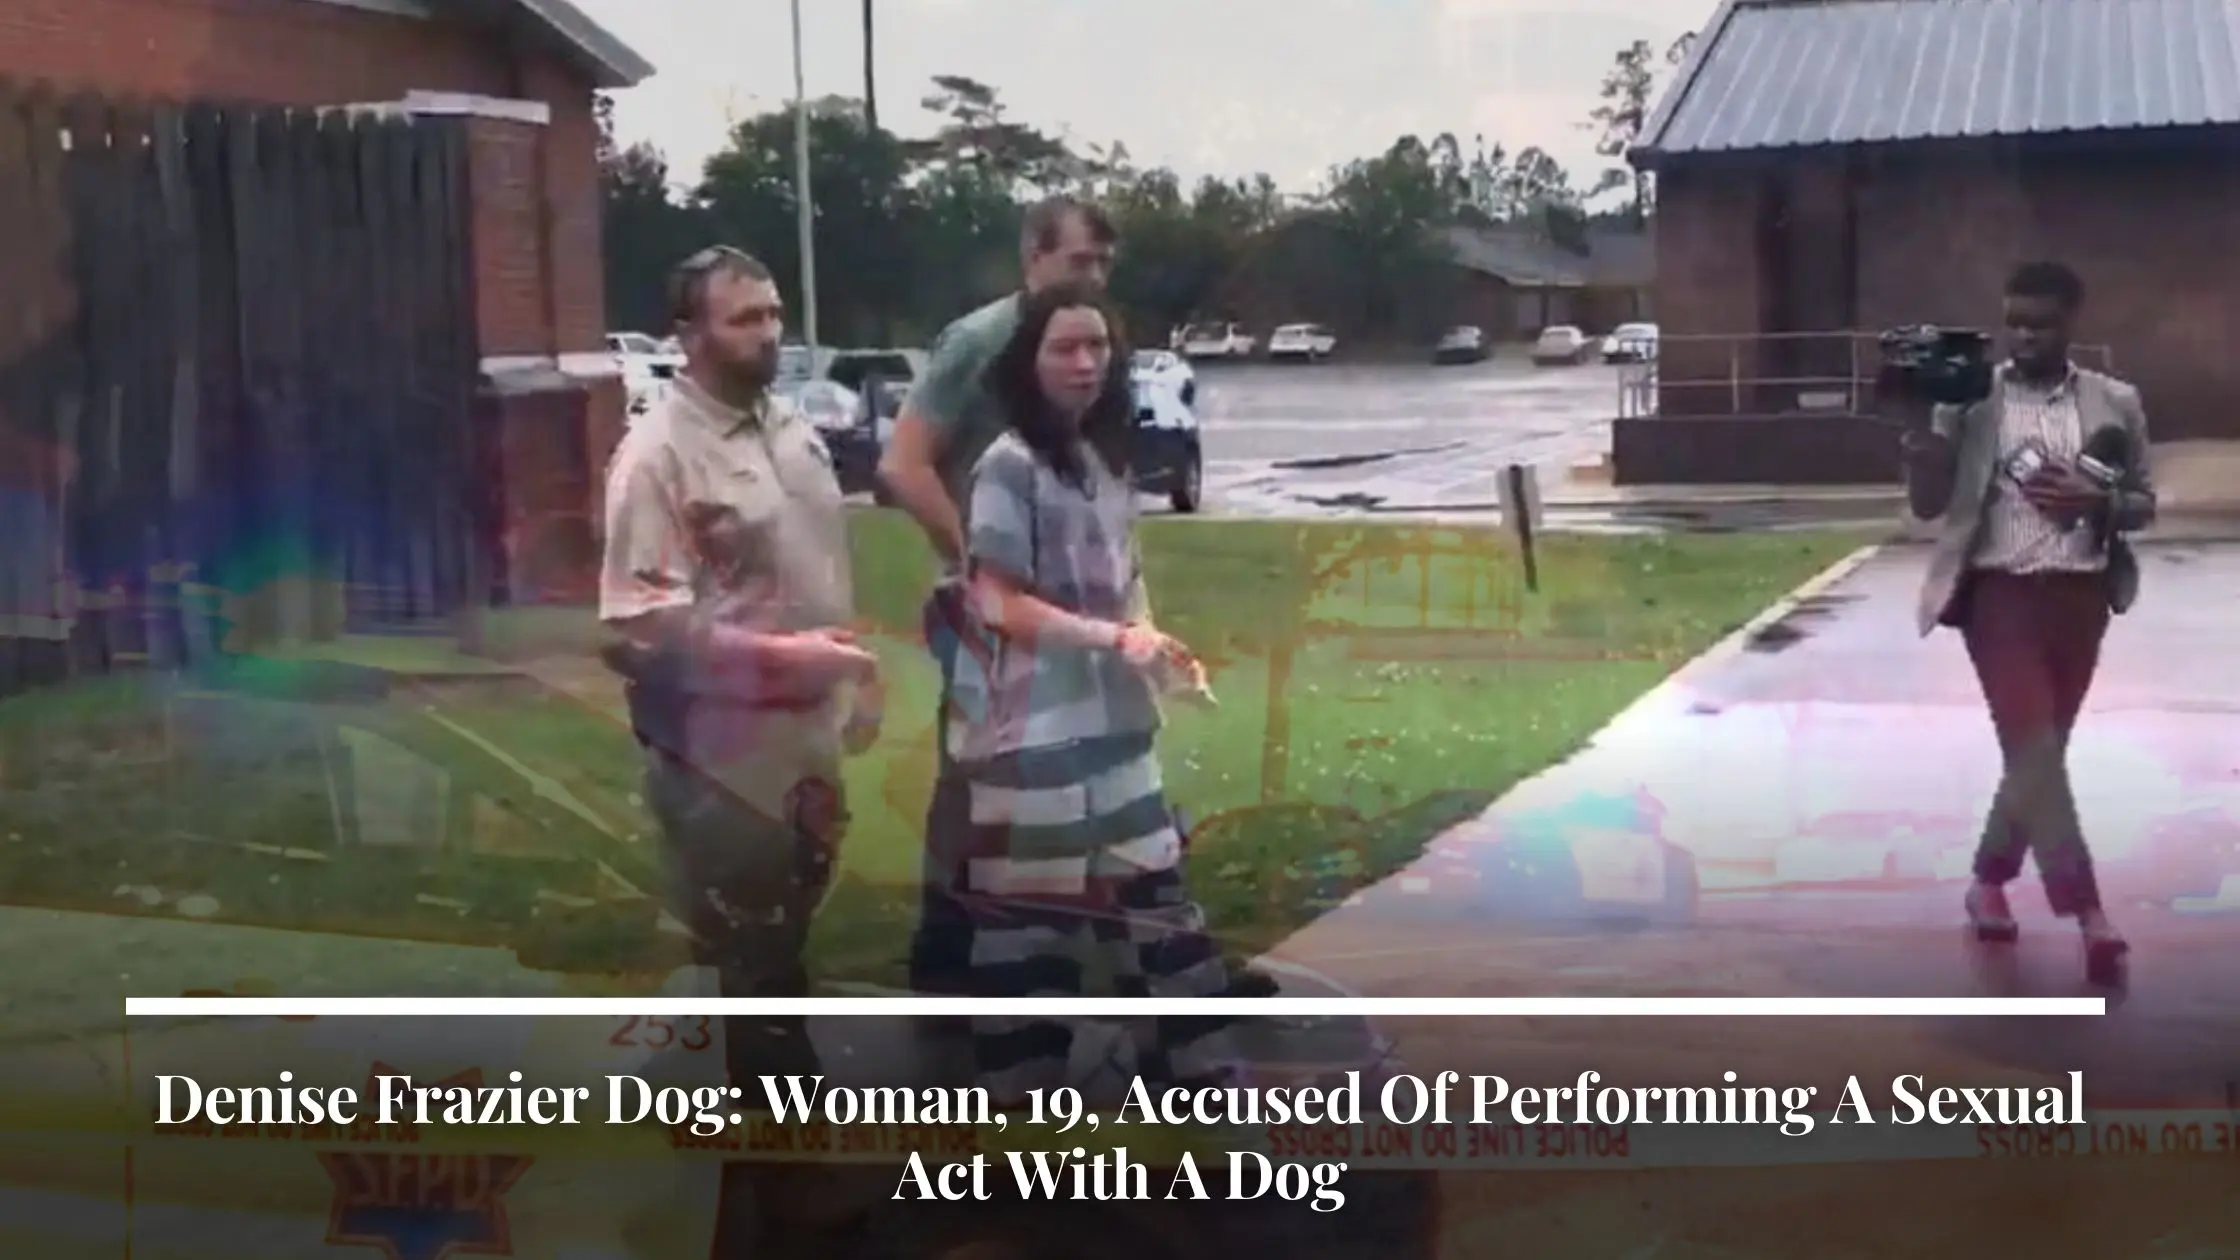 Denise Frazier Dog Woman, 19, Accused Of Performing A Sexual Act With A Dog